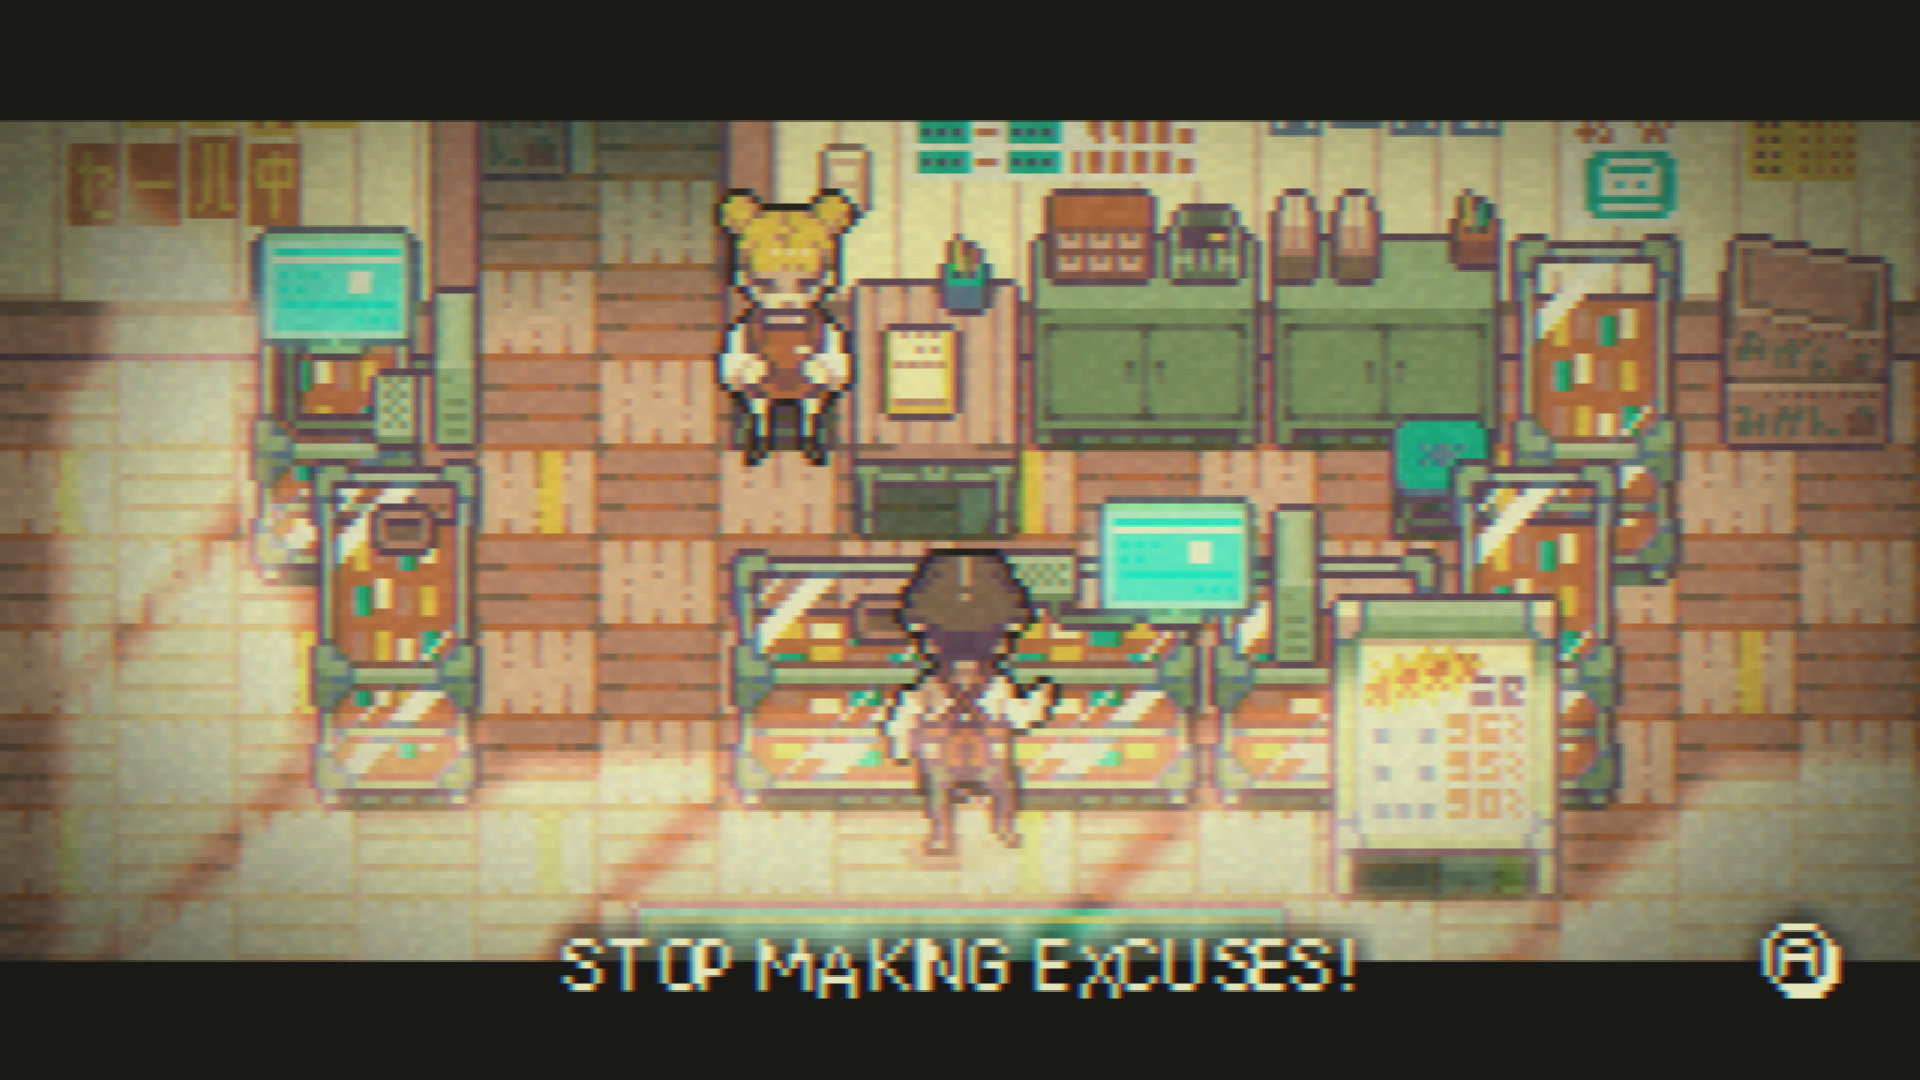 A screenshot from Goodbye World. It's in a store, with two people. One is yelling "Stop making excuses!"